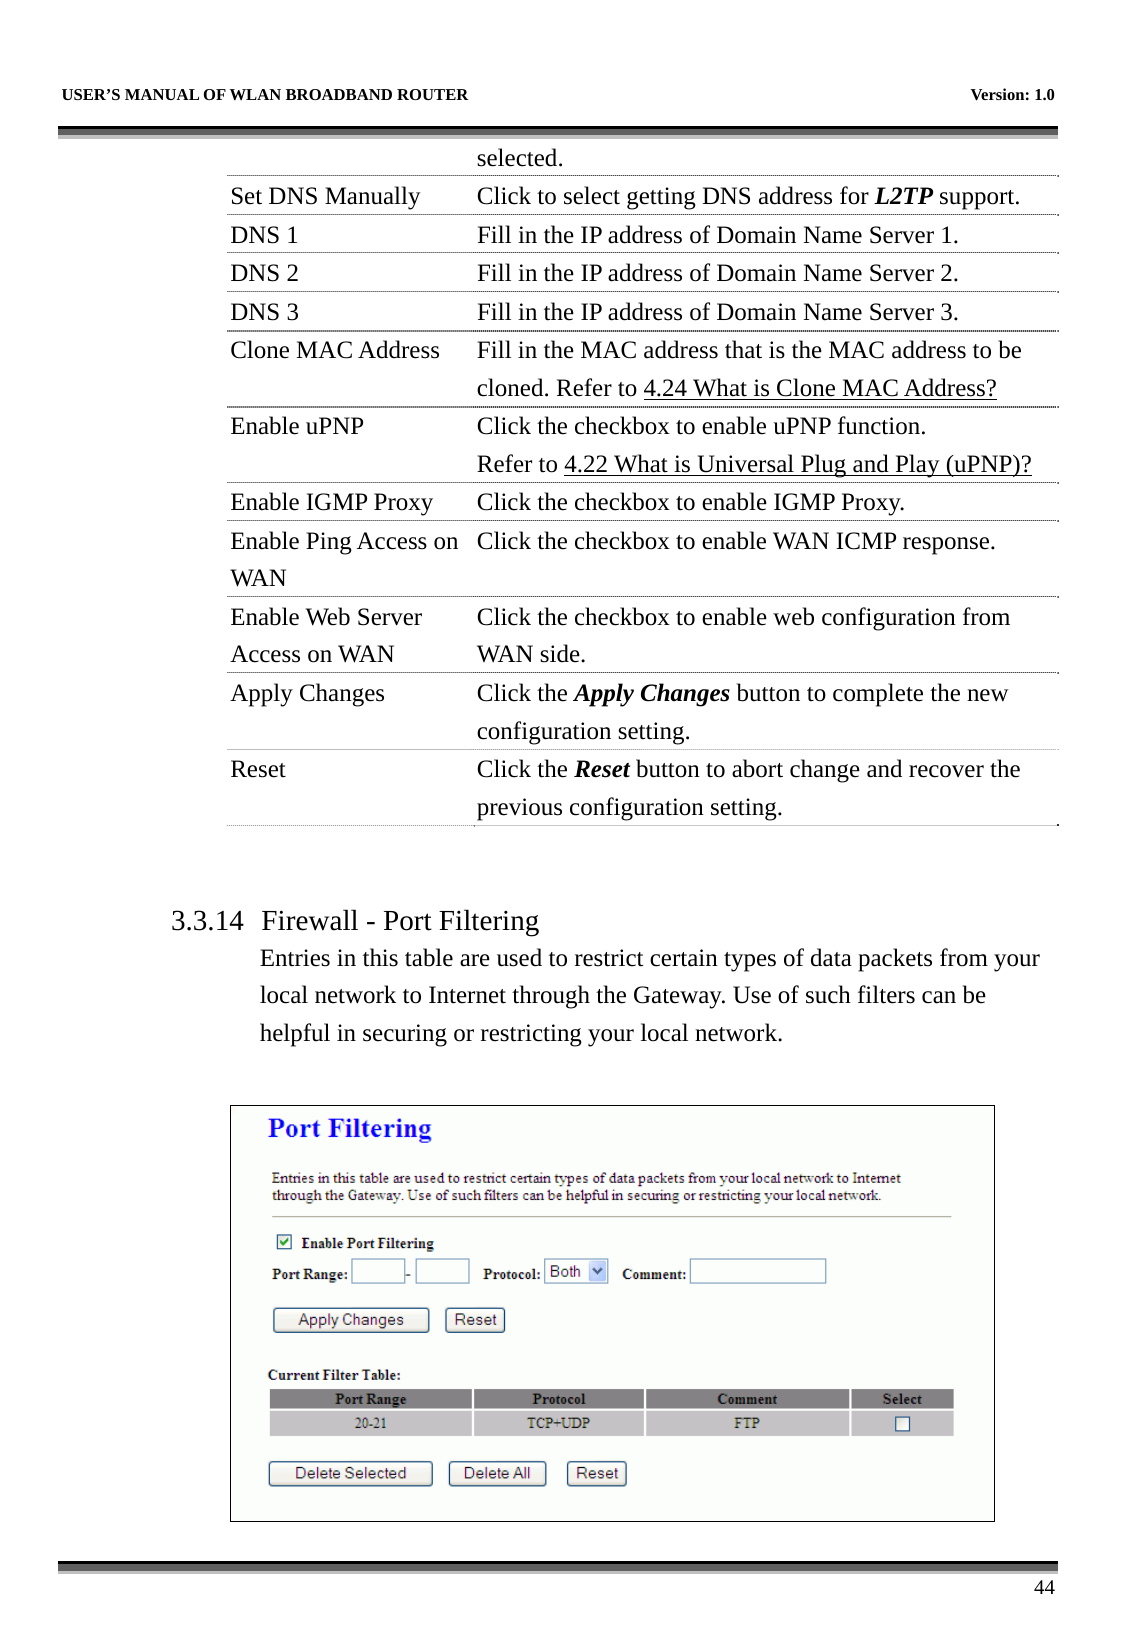   USER’S MANUAL OF WLAN BROADBAND ROUTER    Version: 1.0      44 selected. Set DNS Manually  Click to select getting DNS address for L2TP support. DNS 1  Fill in the IP address of Domain Name Server 1. DNS 2  Fill in the IP address of Domain Name Server 2. DNS 3  Fill in the IP address of Domain Name Server 3. Clone MAC Address  Fill in the MAC address that is the MAC address to be cloned. Refer to 4.24 What is Clone MAC Address? Enable uPNP  Click the checkbox to enable uPNP function. Refer to 4.22 What is Universal Plug and Play (uPNP)? Enable IGMP Proxy Click the checkbox to enable IGMP Proxy. Enable Ping Access on WAN Click the checkbox to enable WAN ICMP response. Enable Web Server Access on WAN Click the checkbox to enable web configuration from WAN side. Apply Changes  Click the Apply Changes button to complete the new configuration setting. Reset Click the Reset button to abort change and recover the previous configuration setting.   3.3.14 Firewall - Port Filtering Entries in this table are used to restrict certain types of data packets from your local network to Internet through the Gateway. Use of such filters can be helpful in securing or restricting your local network.   